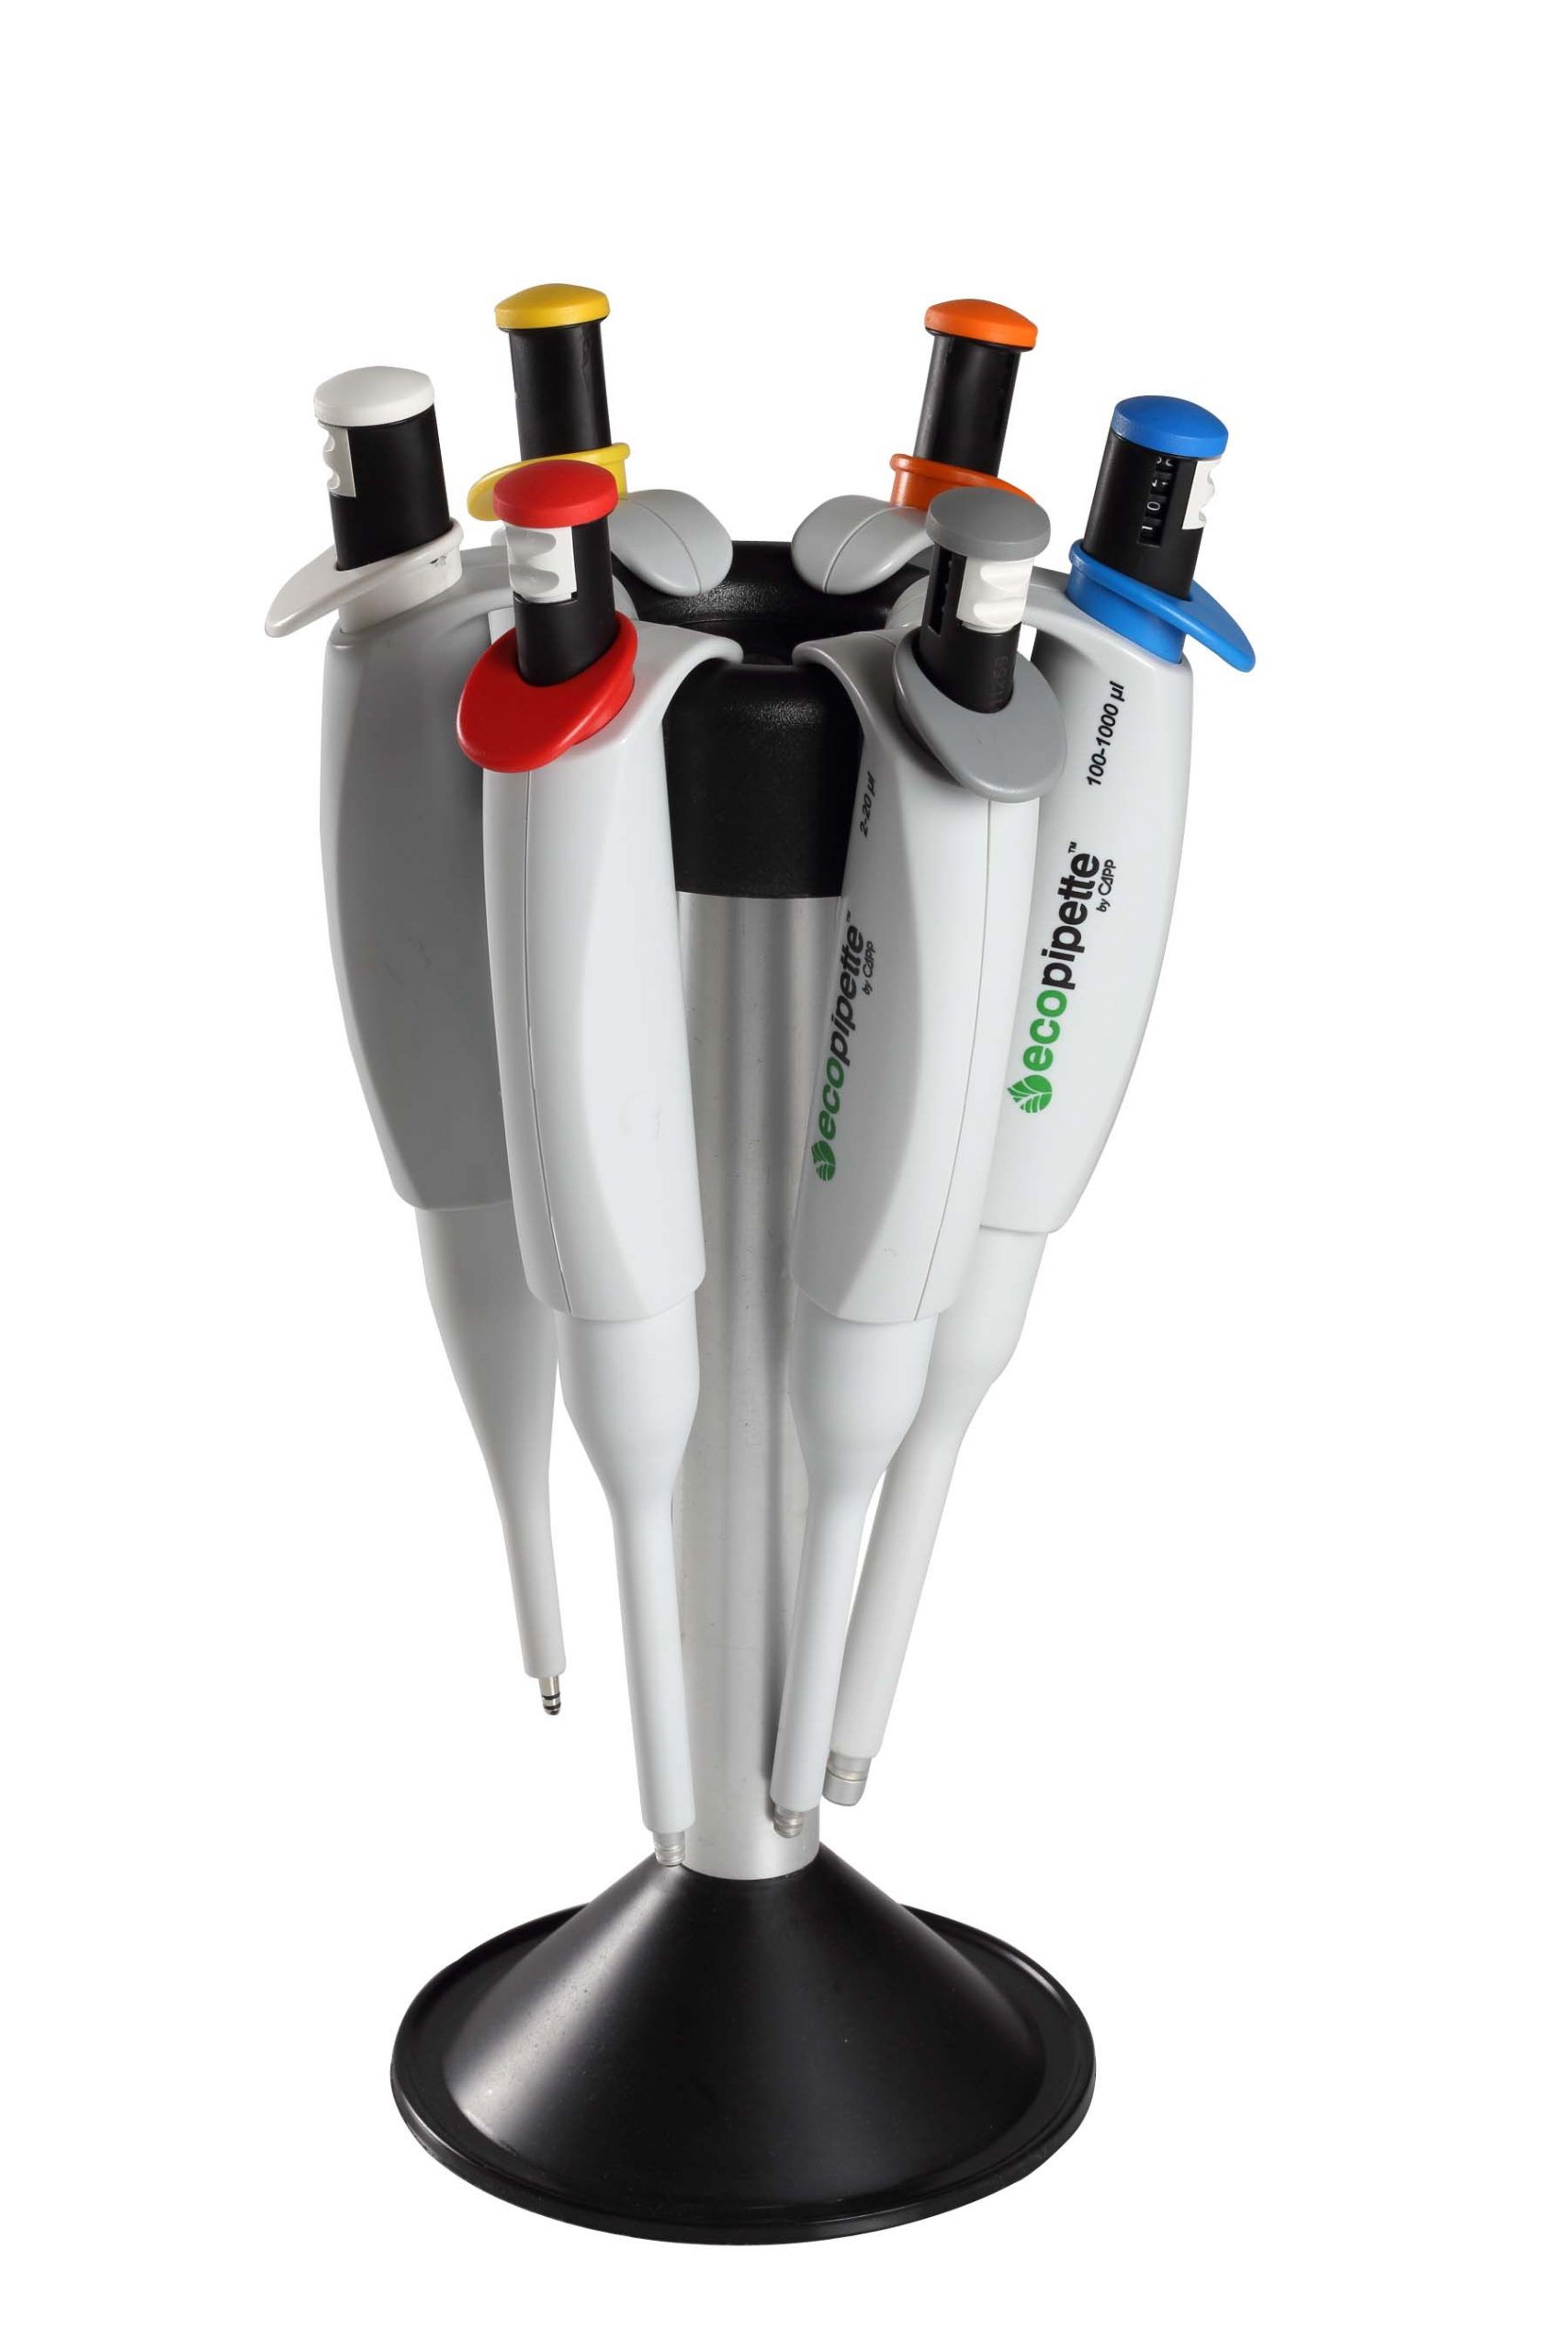 CAPP Aero Carousel Stand For Up To 6 Pipettes